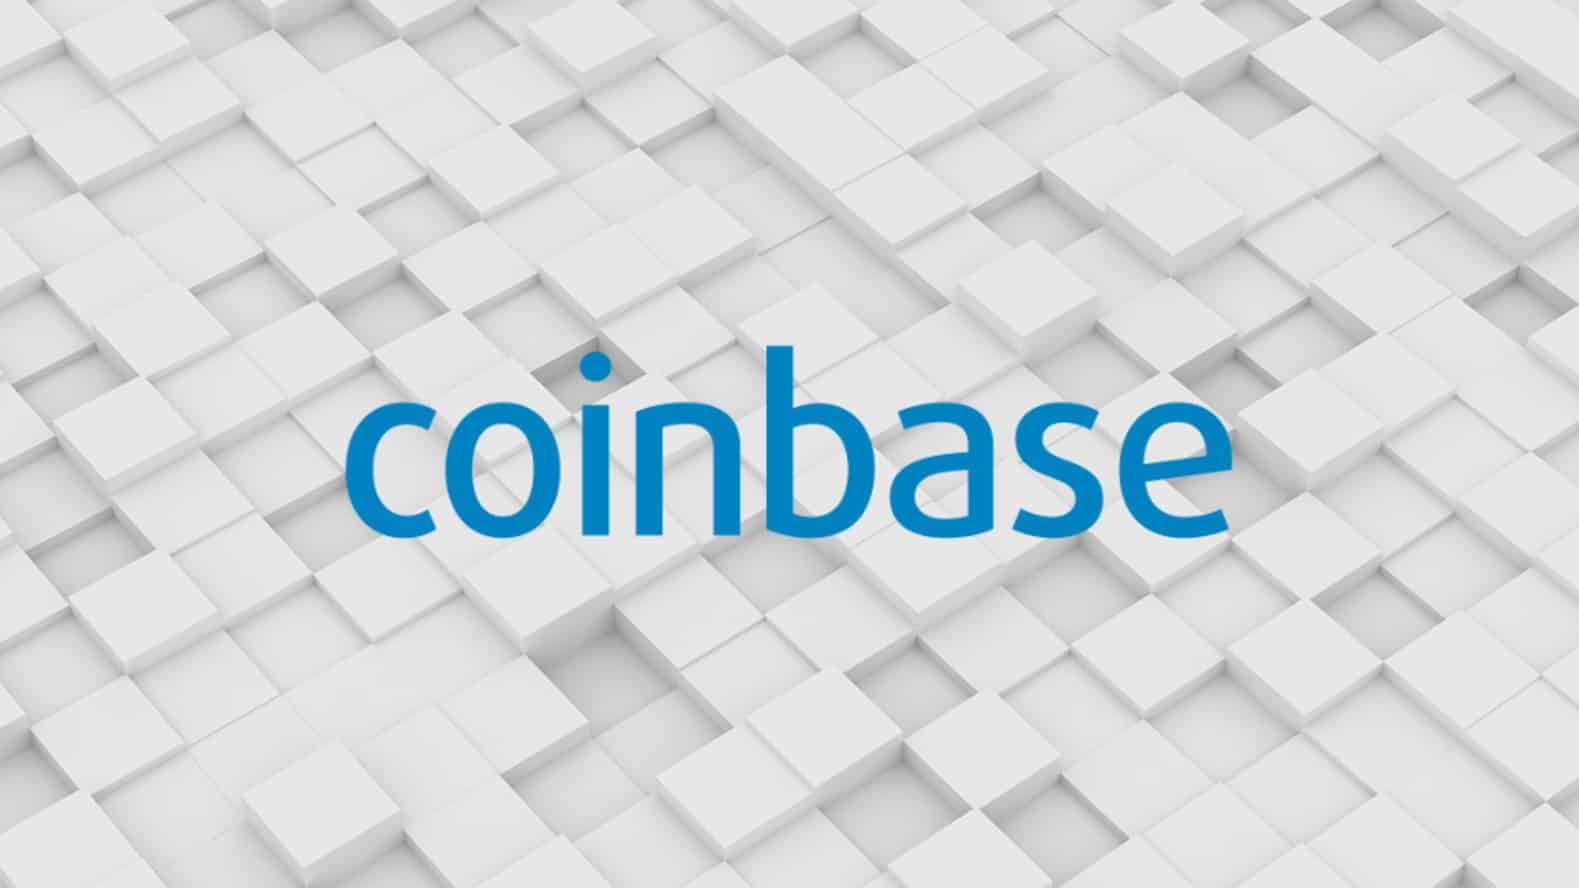 Coinbase is Looking for Support from More New Digital Assets